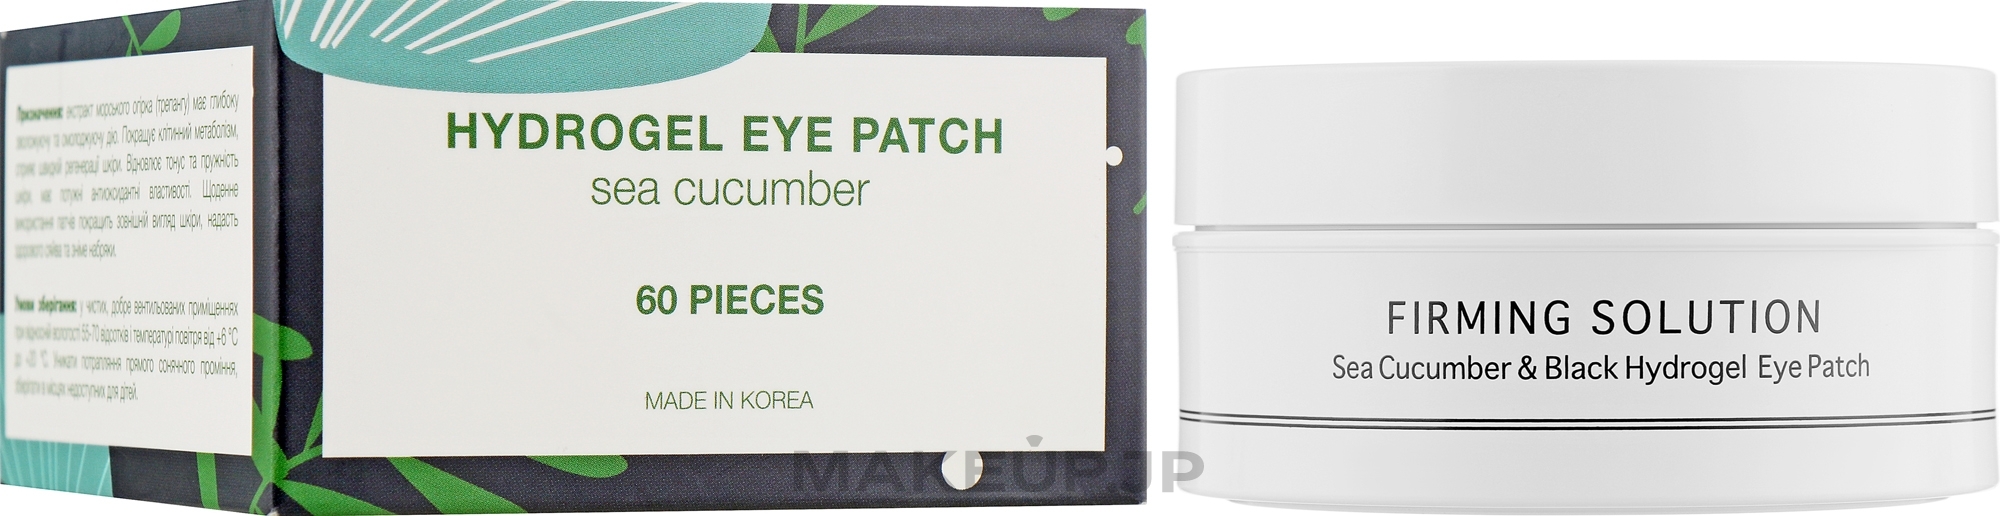 Hydrogel Eye Patch with Sea Cucumber Extract & Black Pearl Powder, standard size - BeauuGreen Sea Cucumber & Black Hydrogel Eye Patch — photo 60 szt.